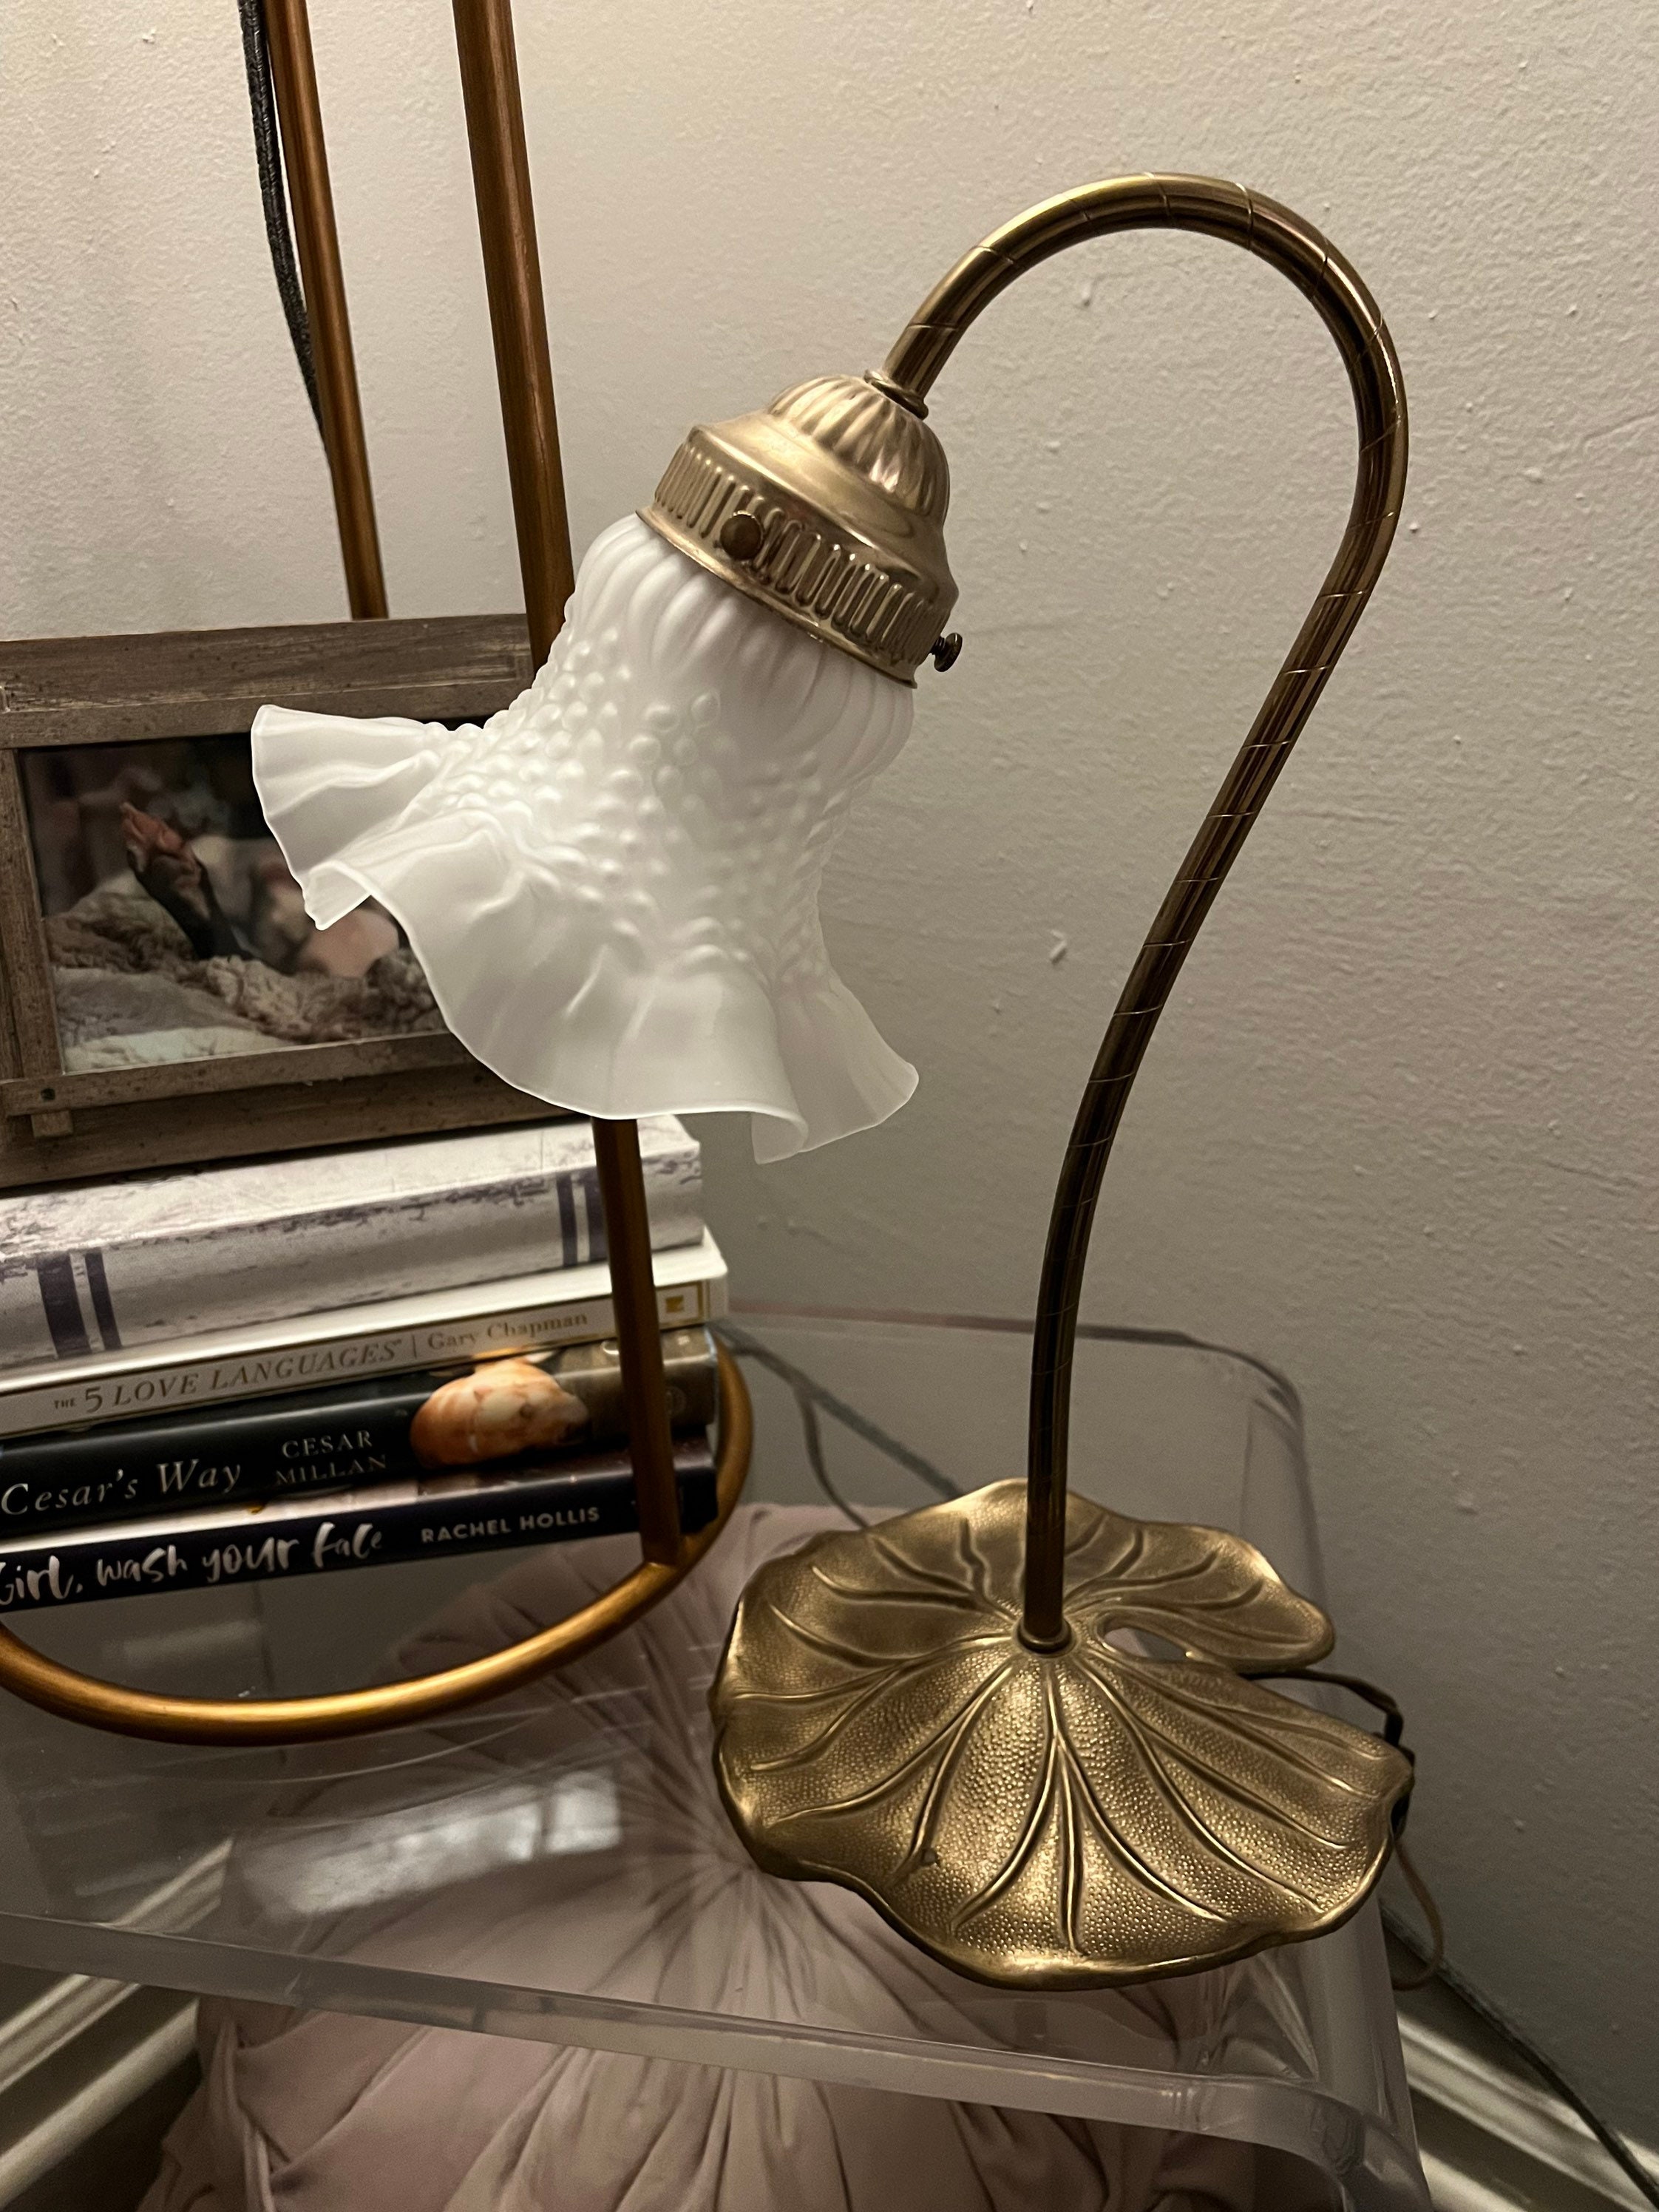 Vintage Lamp-goose Neck/lily Pad Table Lamp by Grandlite. 